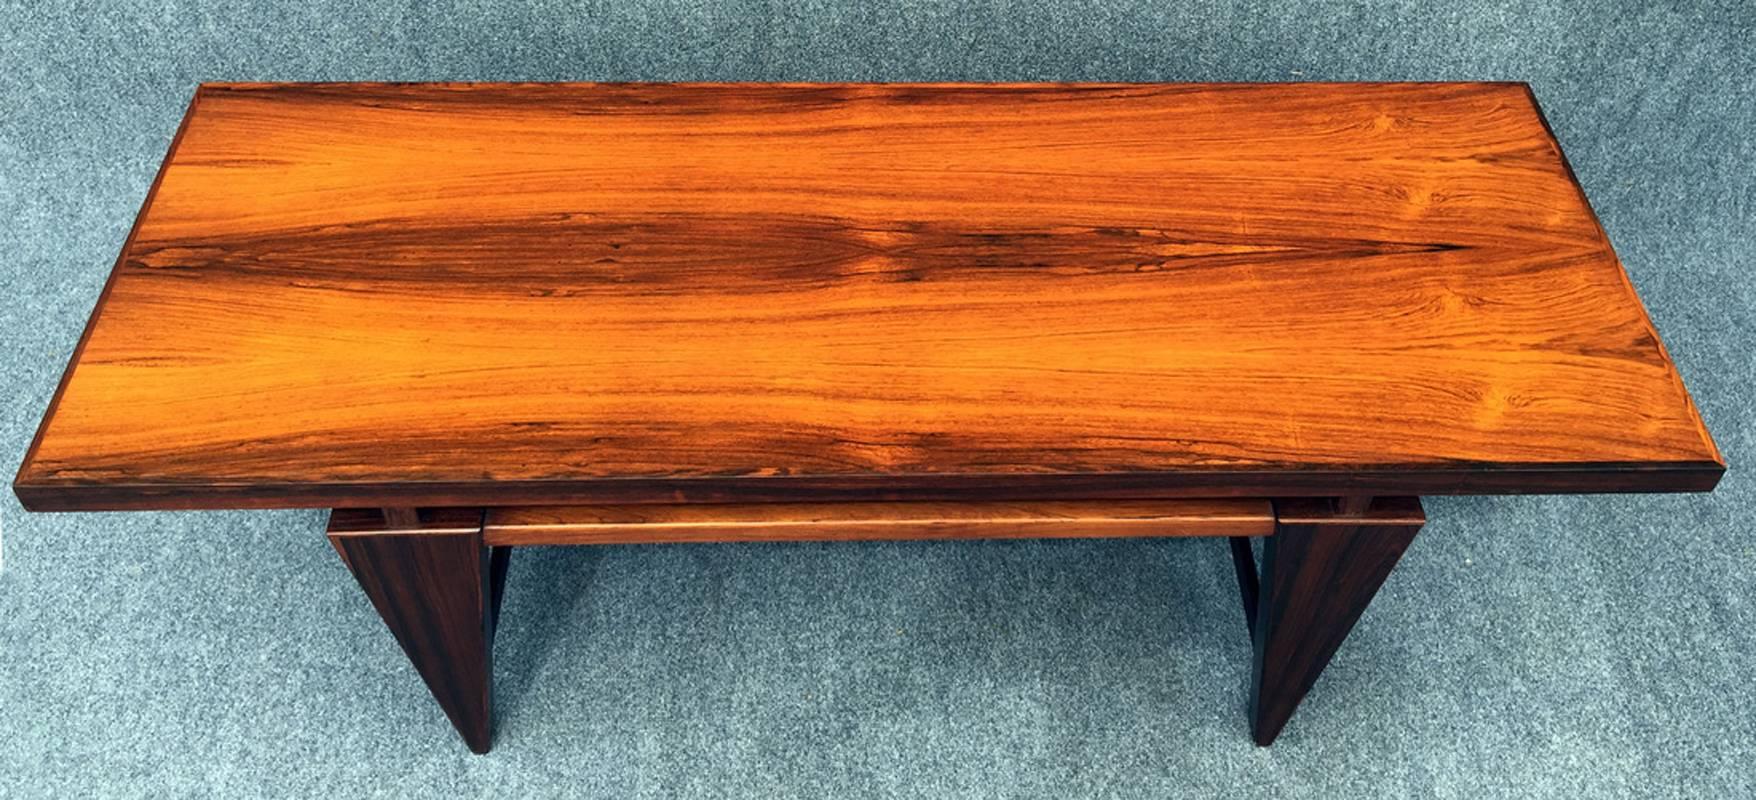 Long Danish Rosewood Coffee Table by Illum Wikkelsø In Excellent Condition In Little Burstead, Essex